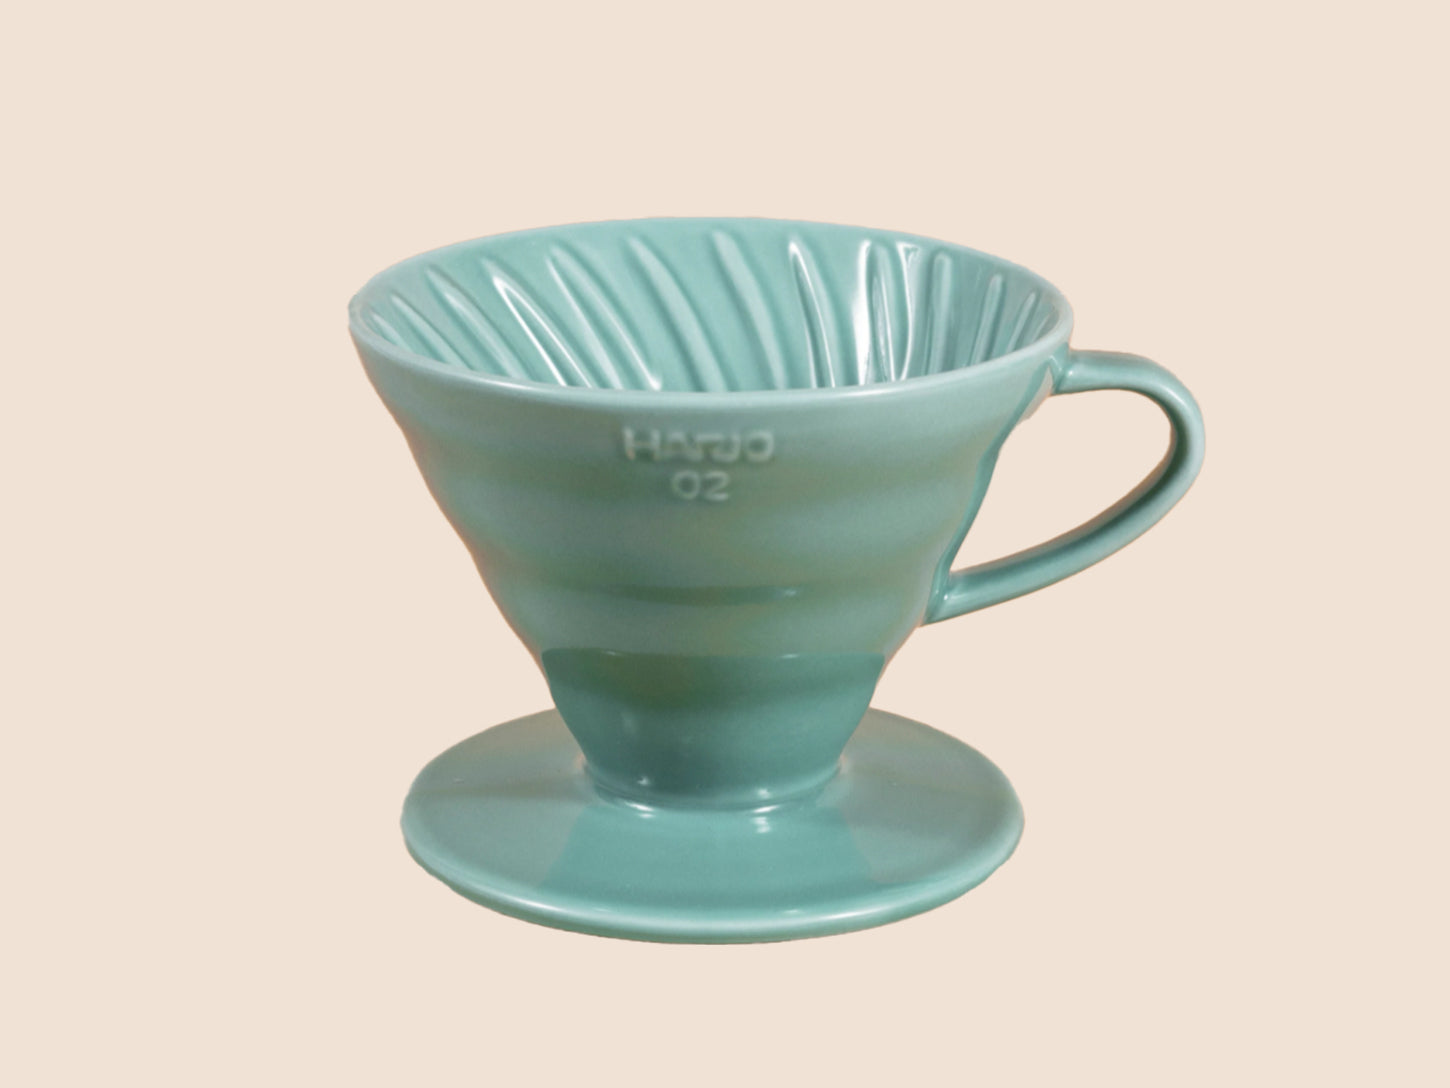 Hario V60 Drip Scale and Timer - Turquoise – Morgan Drinks Coffee